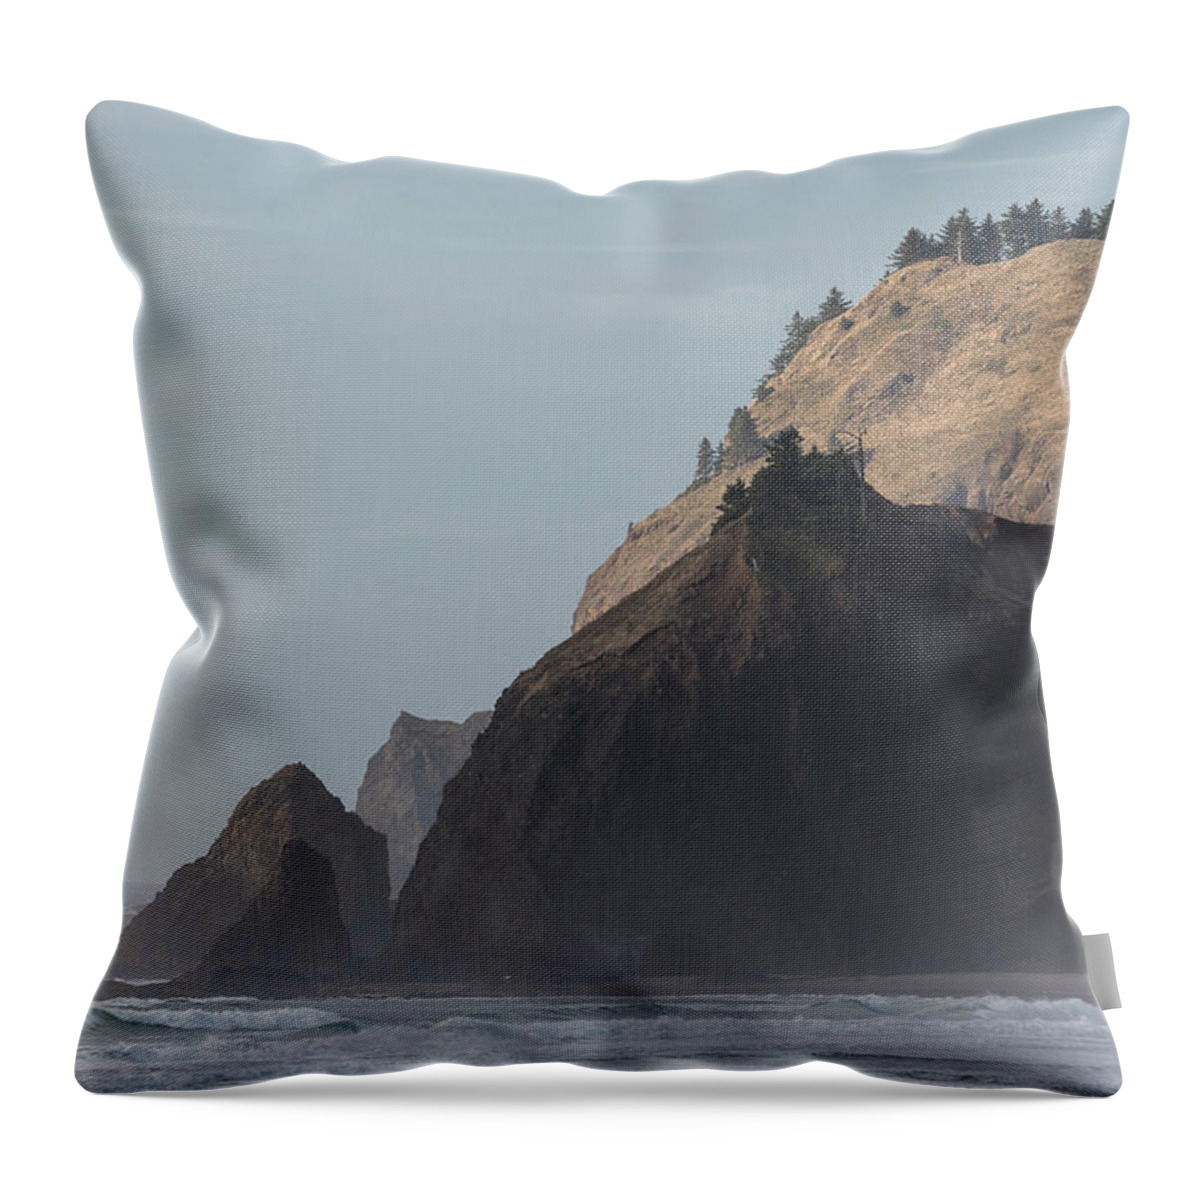 Autumn Throw Pillow featuring the photograph Road's End by Robert Potts